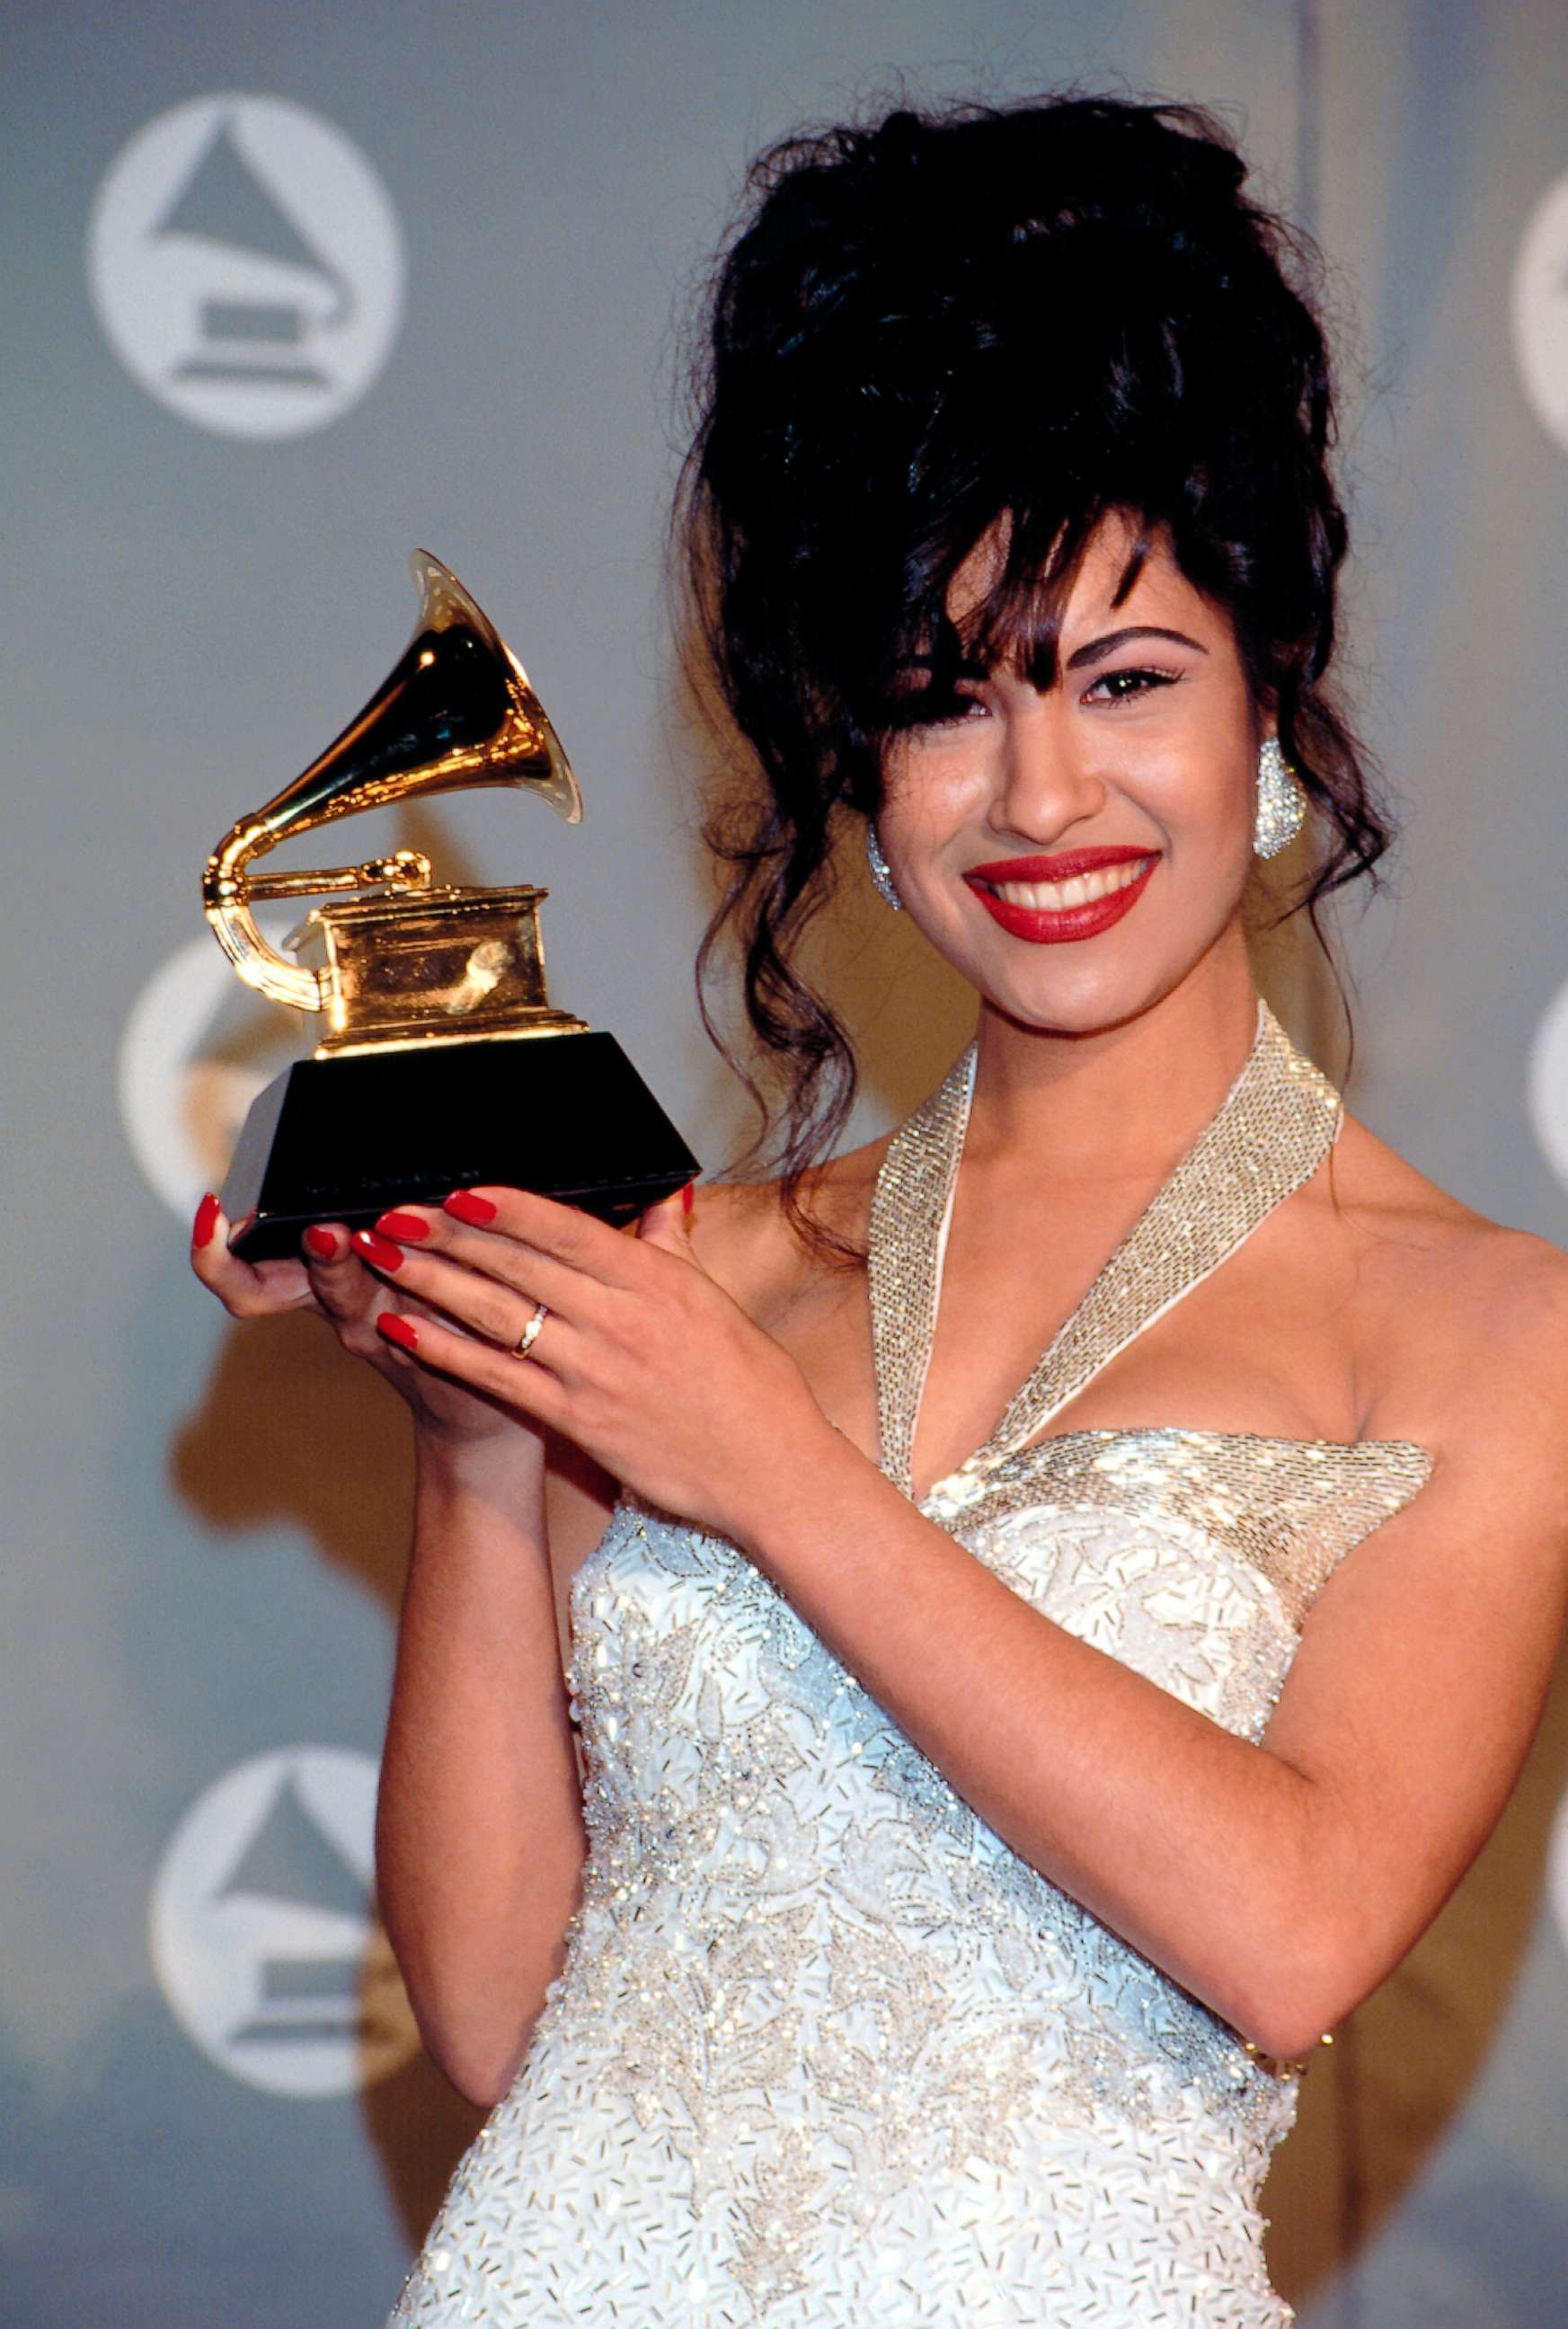 PHOTO: Selena Quintanilla-Perez poses with her award for Best Mexican-American Album in the pressroom of the 36th Annual Grammy Awards in New York, March 2, 1994.